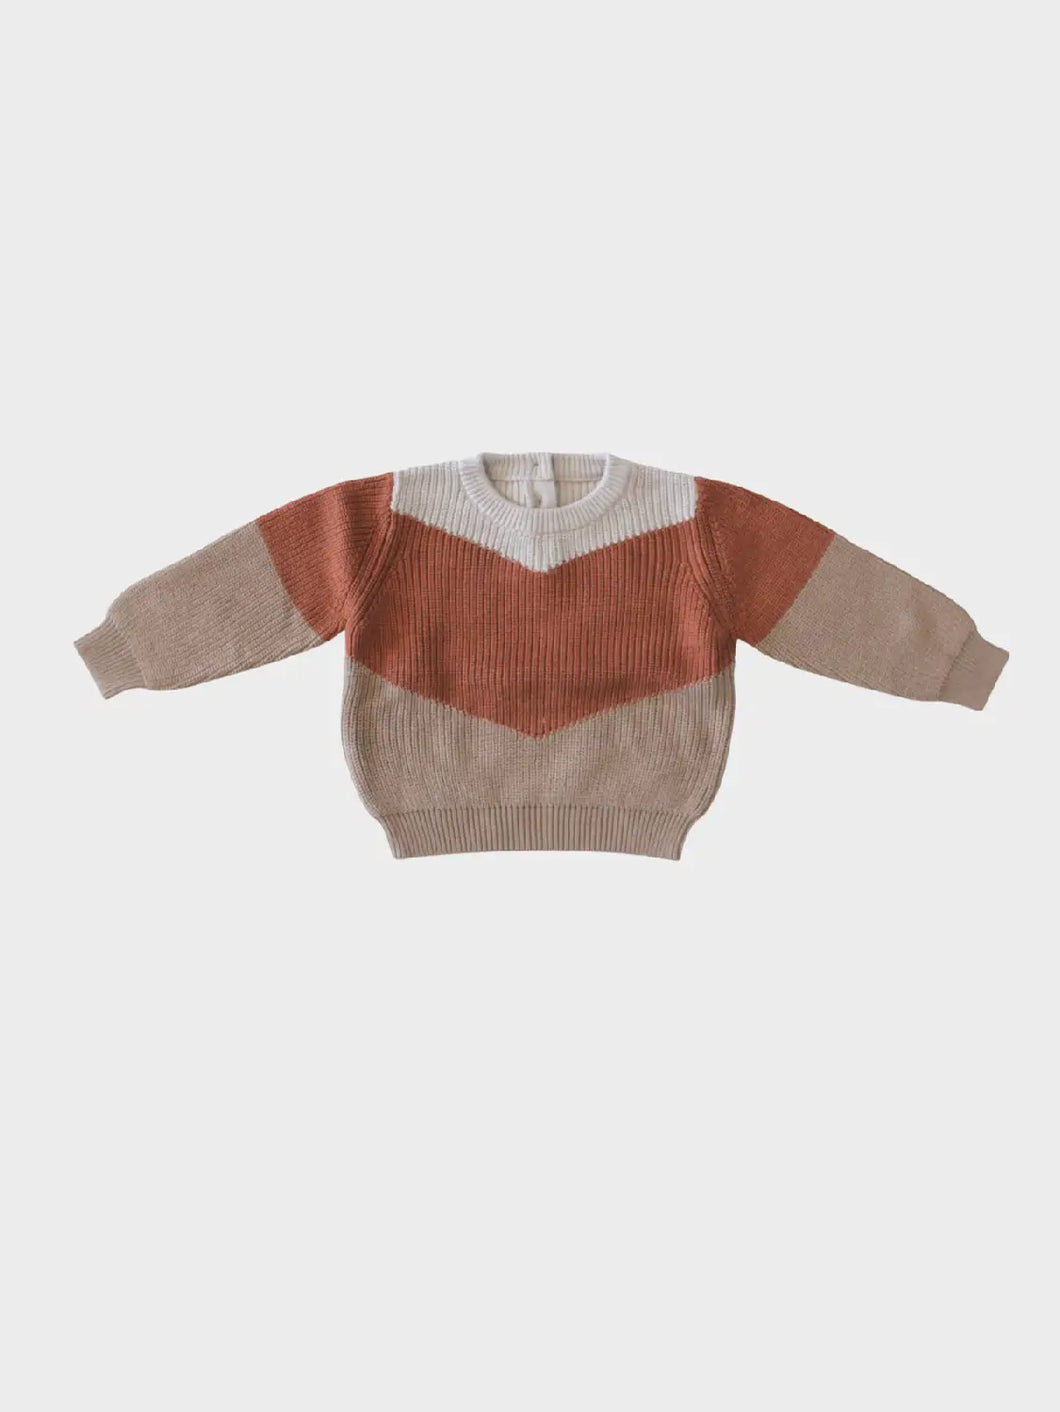 Knit Sweater in Spice